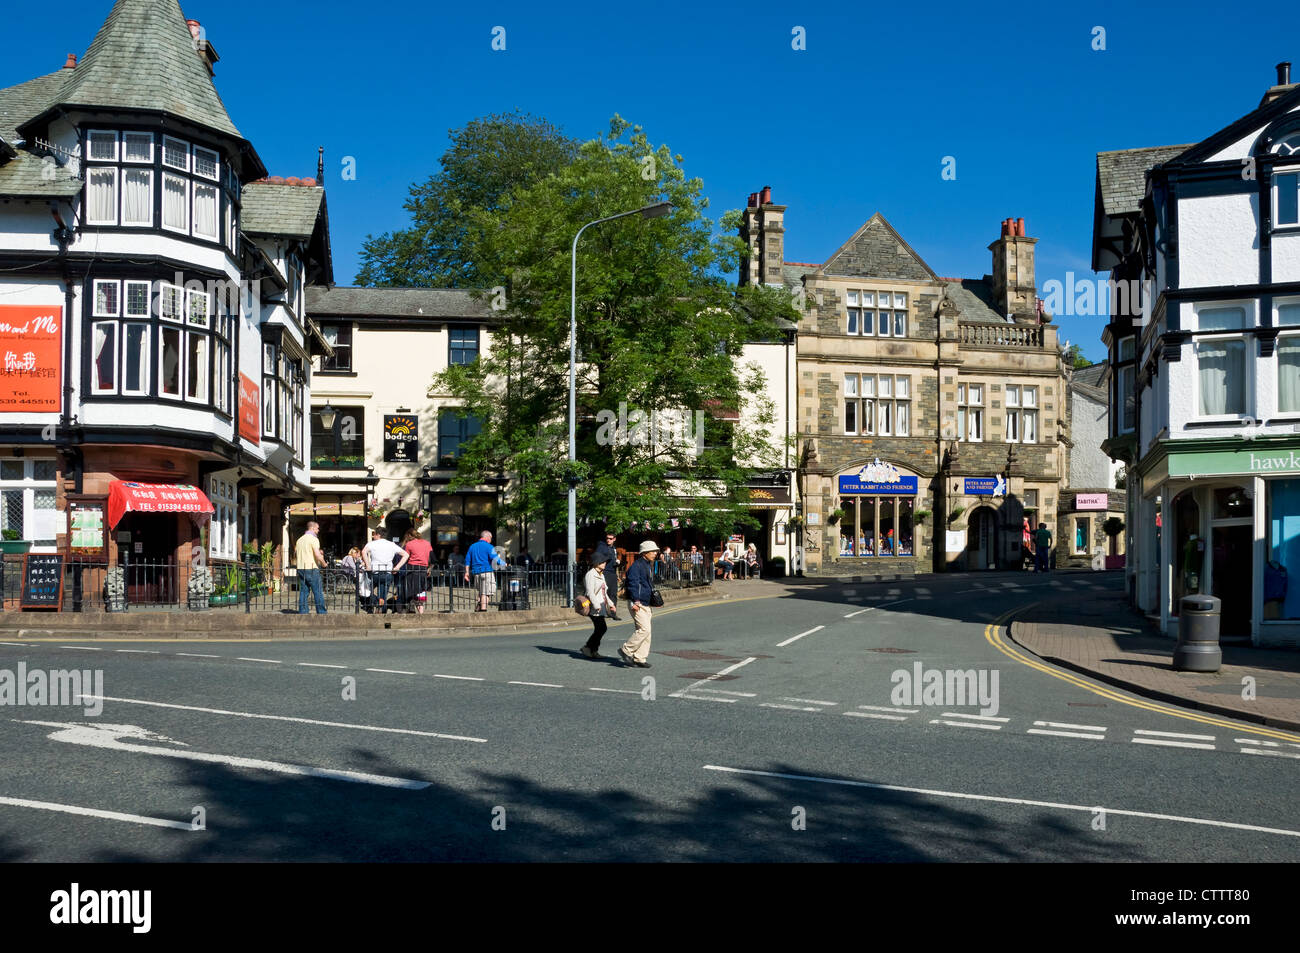 People visitors tourists visiting walking in the town centre in summer Bowness on Windermere Cumbria England UK United Kingdom GB Great Britain Stock Photo